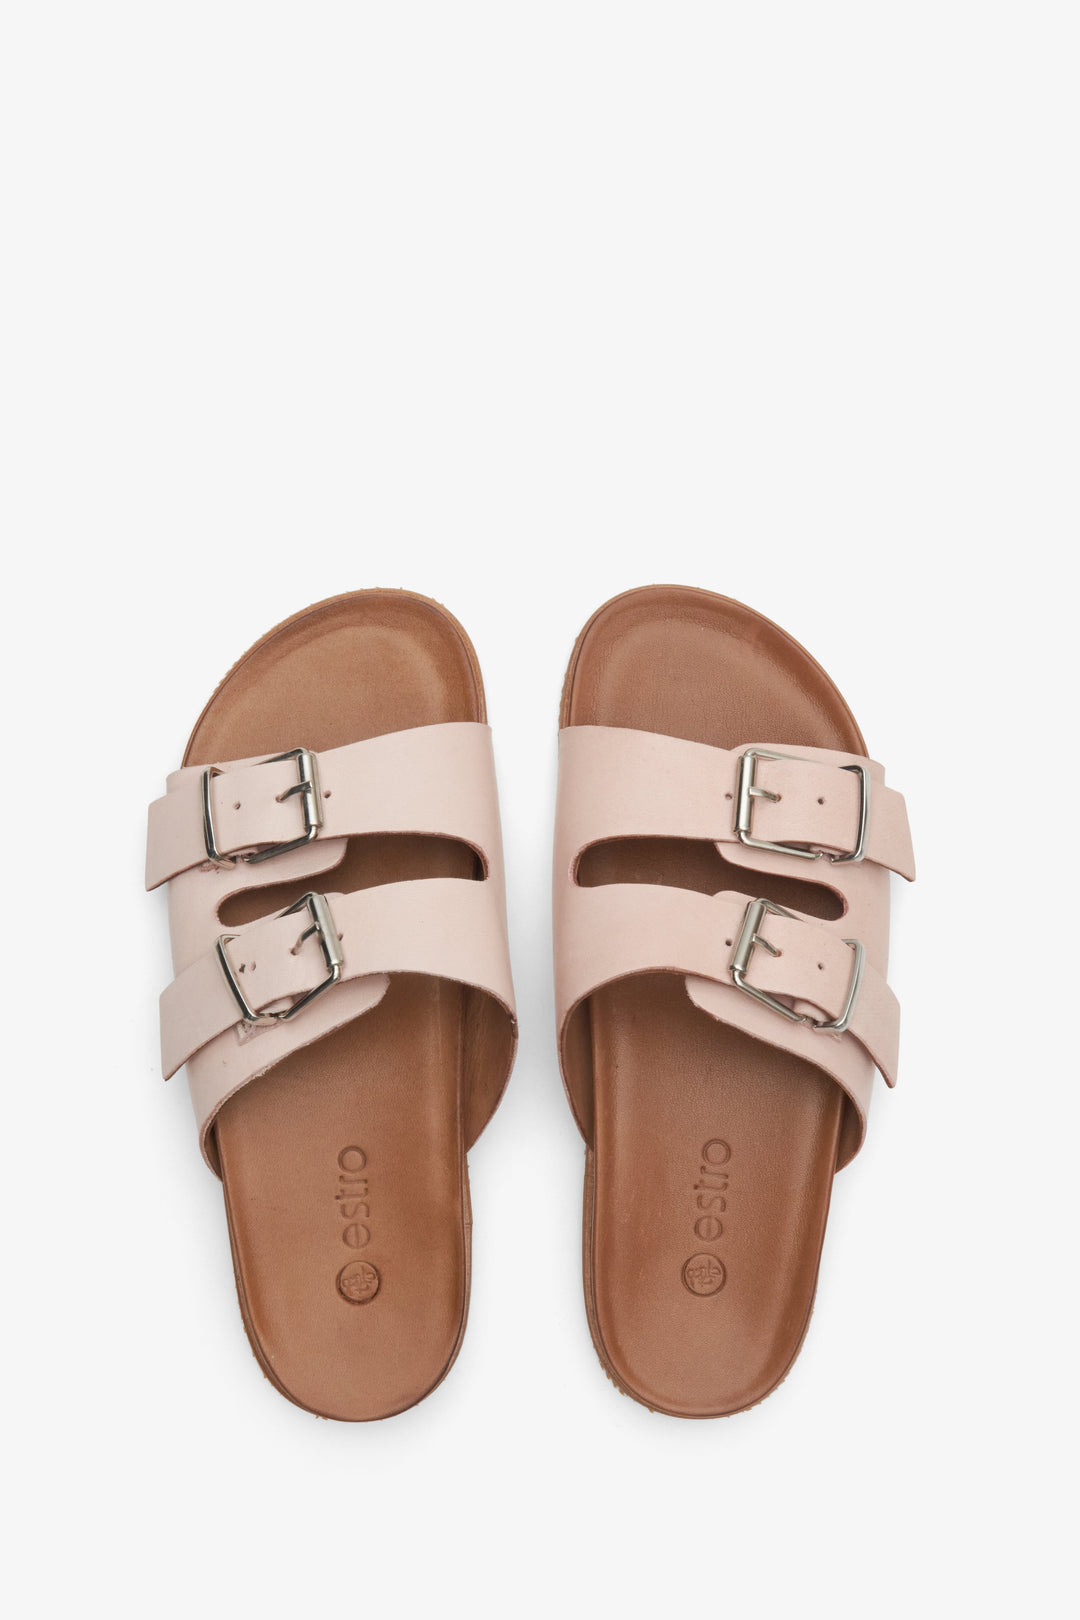 Women's pastel pink Estro slide sandals made of Italian natural leather - presentation of shoes from above.